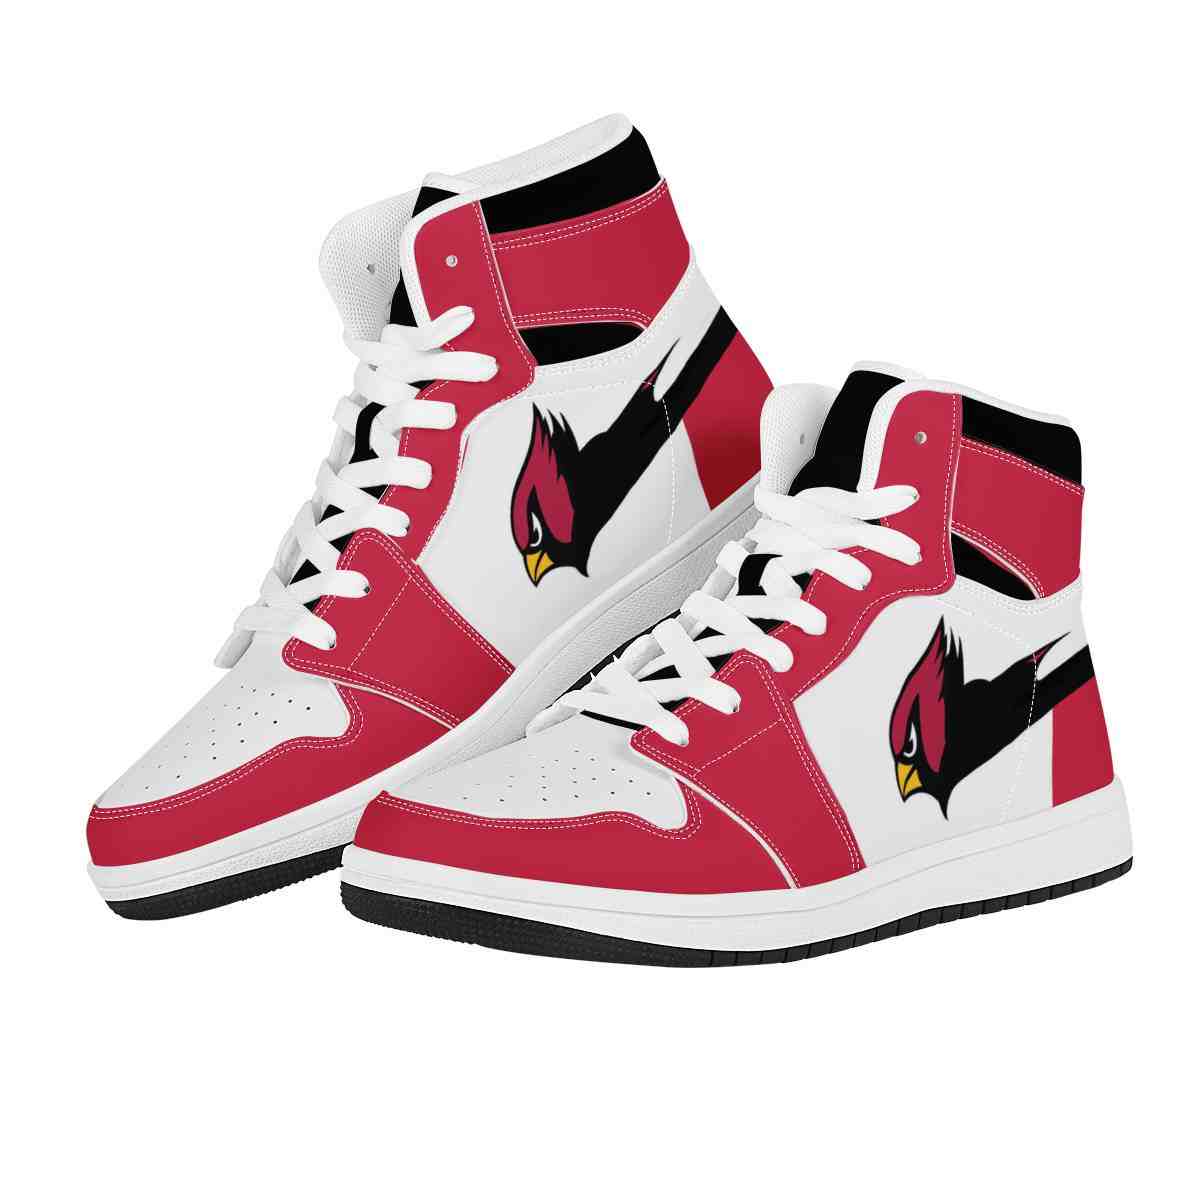 NFL Customized  shoes Arizona Cardinals High Top Leather AJ1 Sneakers 001 Customized  shoes